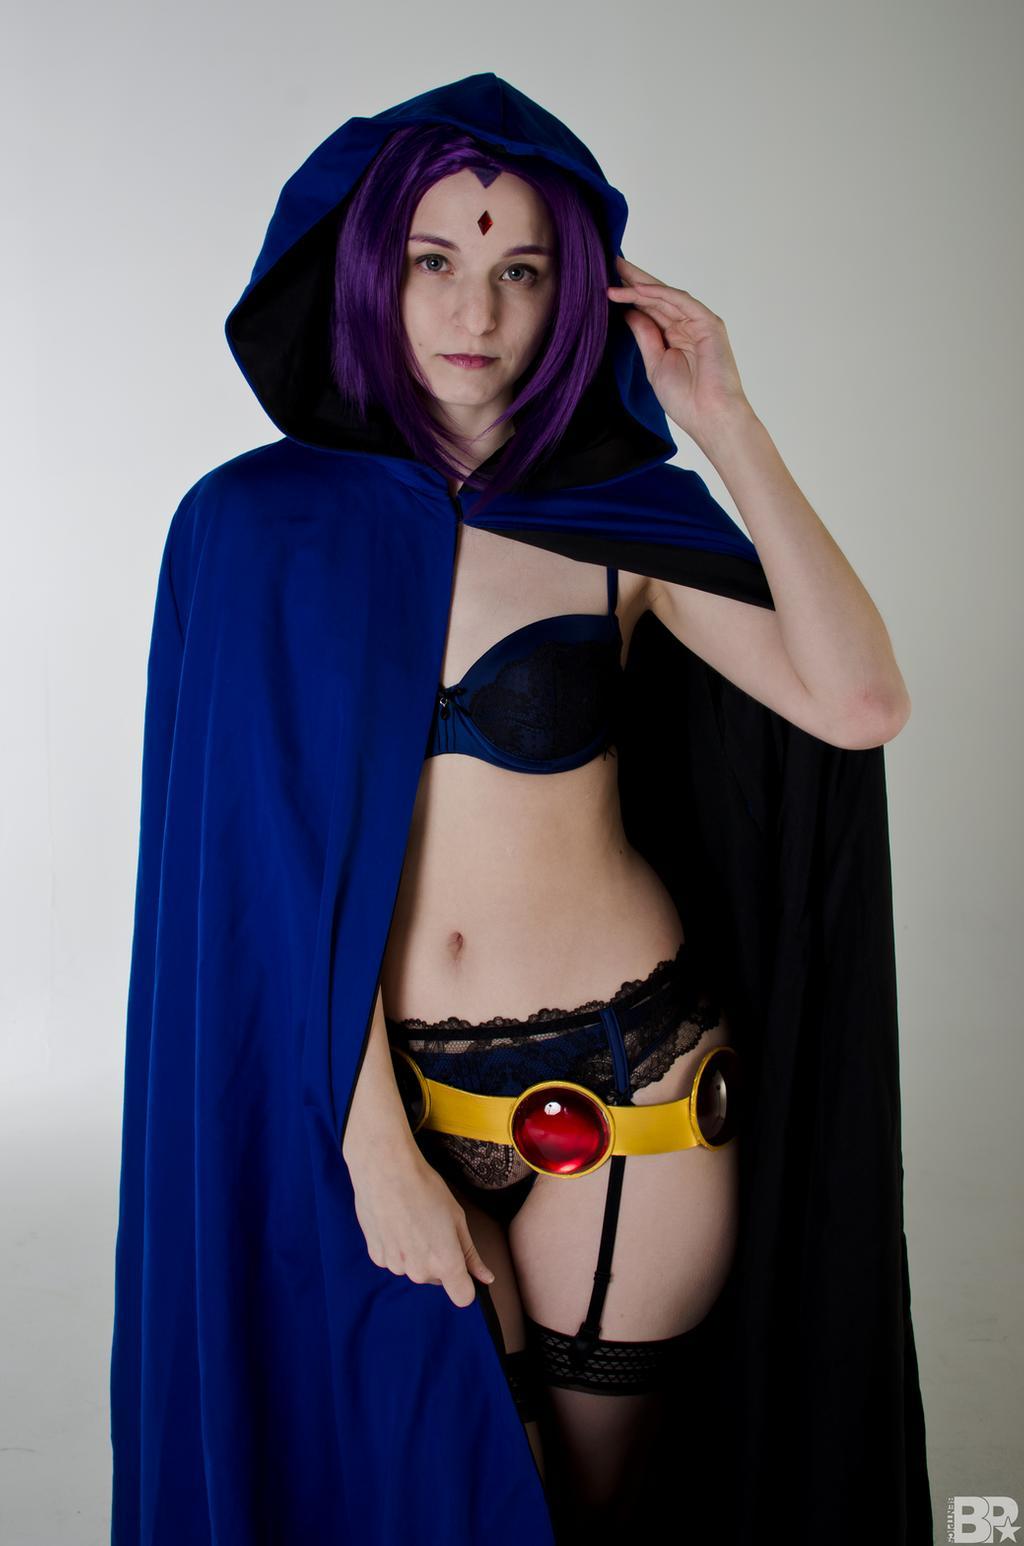 50+ Hot Pictures Of Raven From Teen Titans, DC Comics. 24